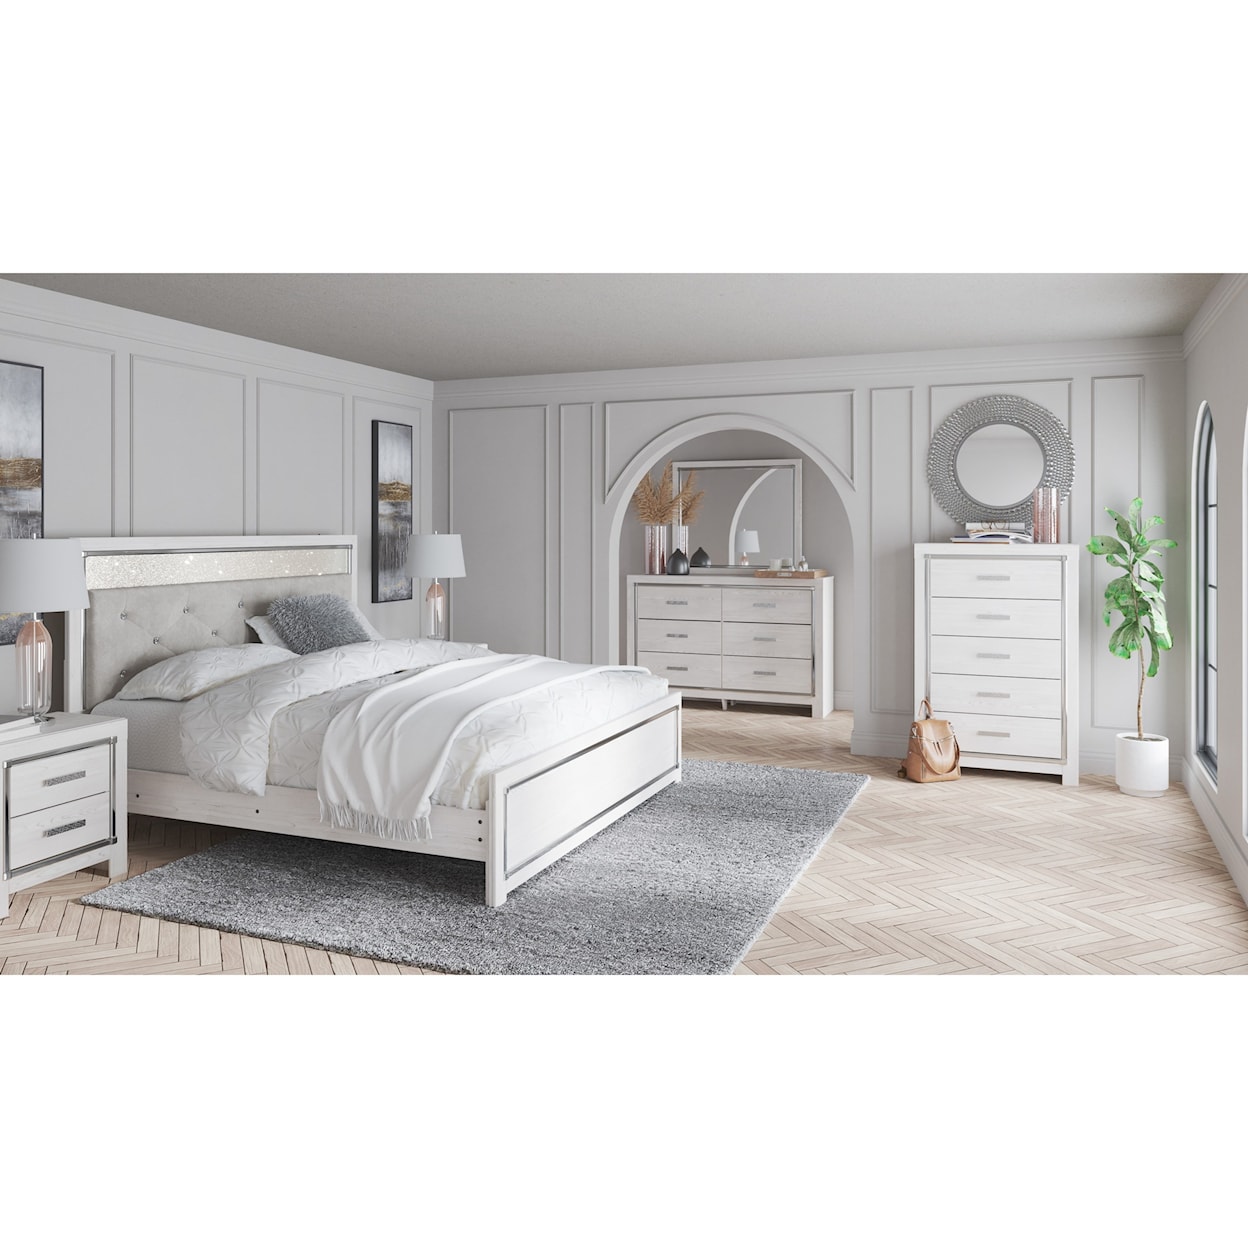 Signature Design by Ashley Altyra King Bedroom Group